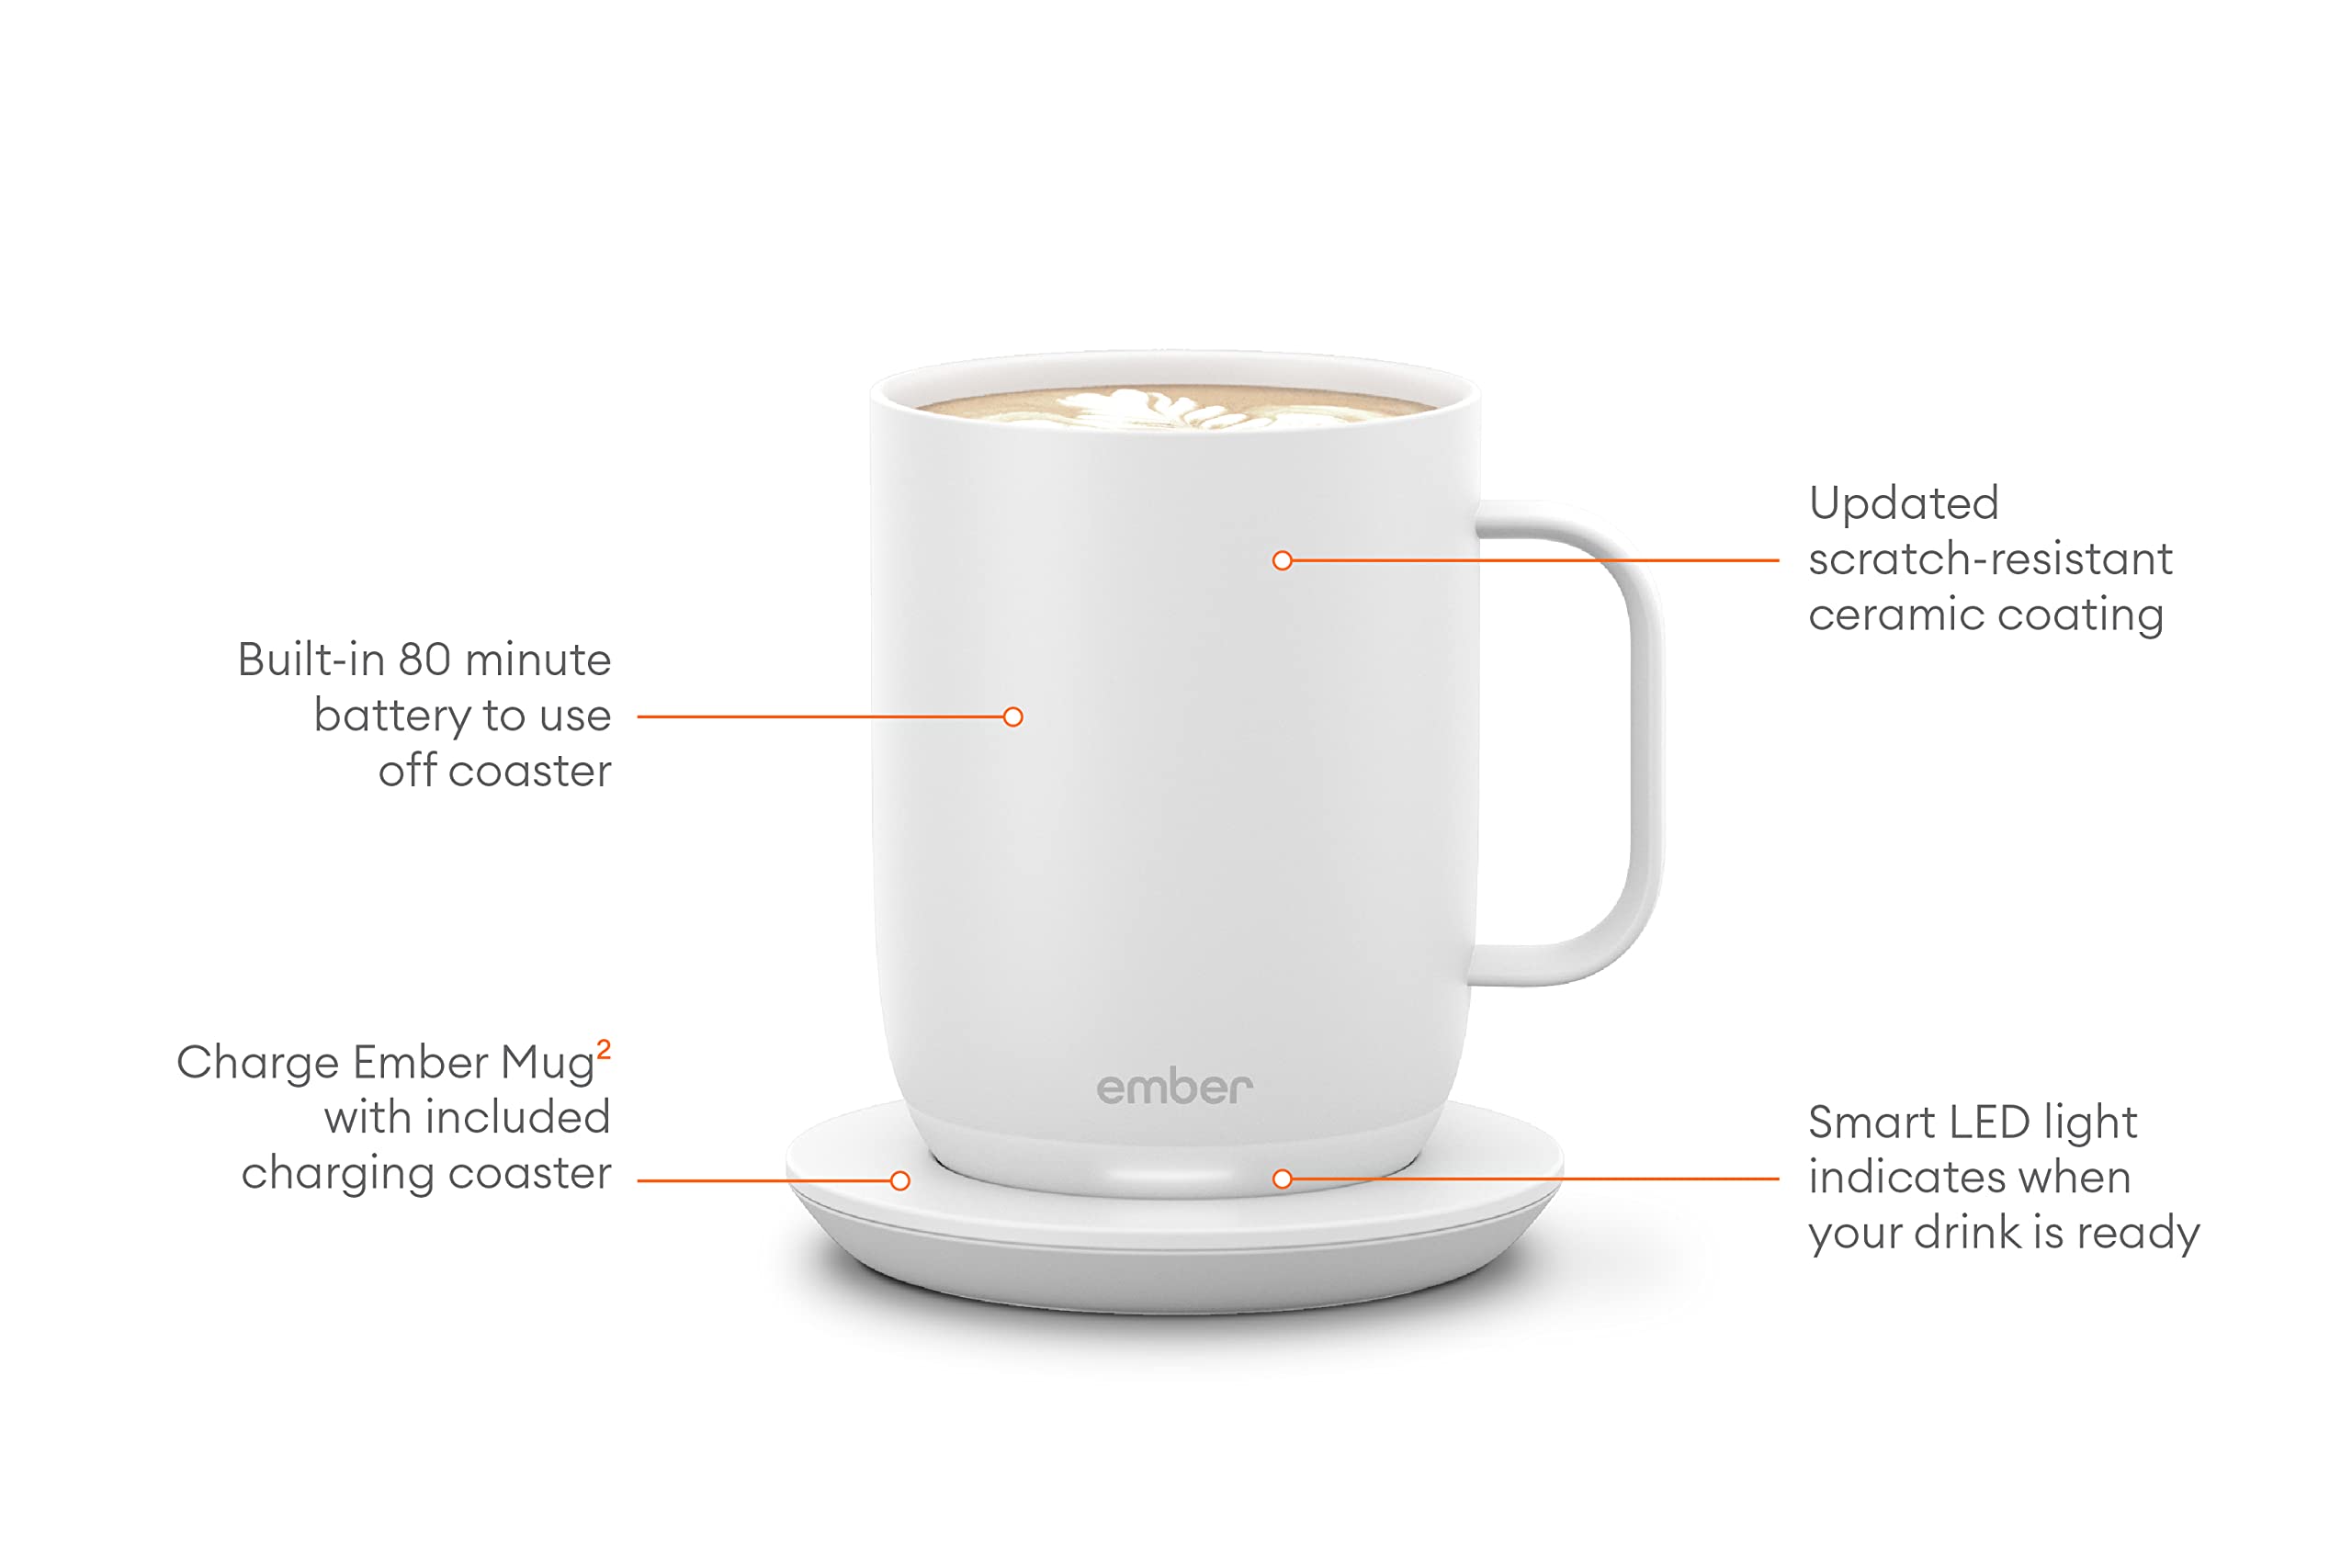 Ember Temperature Control Smart Mug 2, 14 Oz, App-Controlled Heated Coffee Mug with 80 Min Battery Life and Improved Design, White